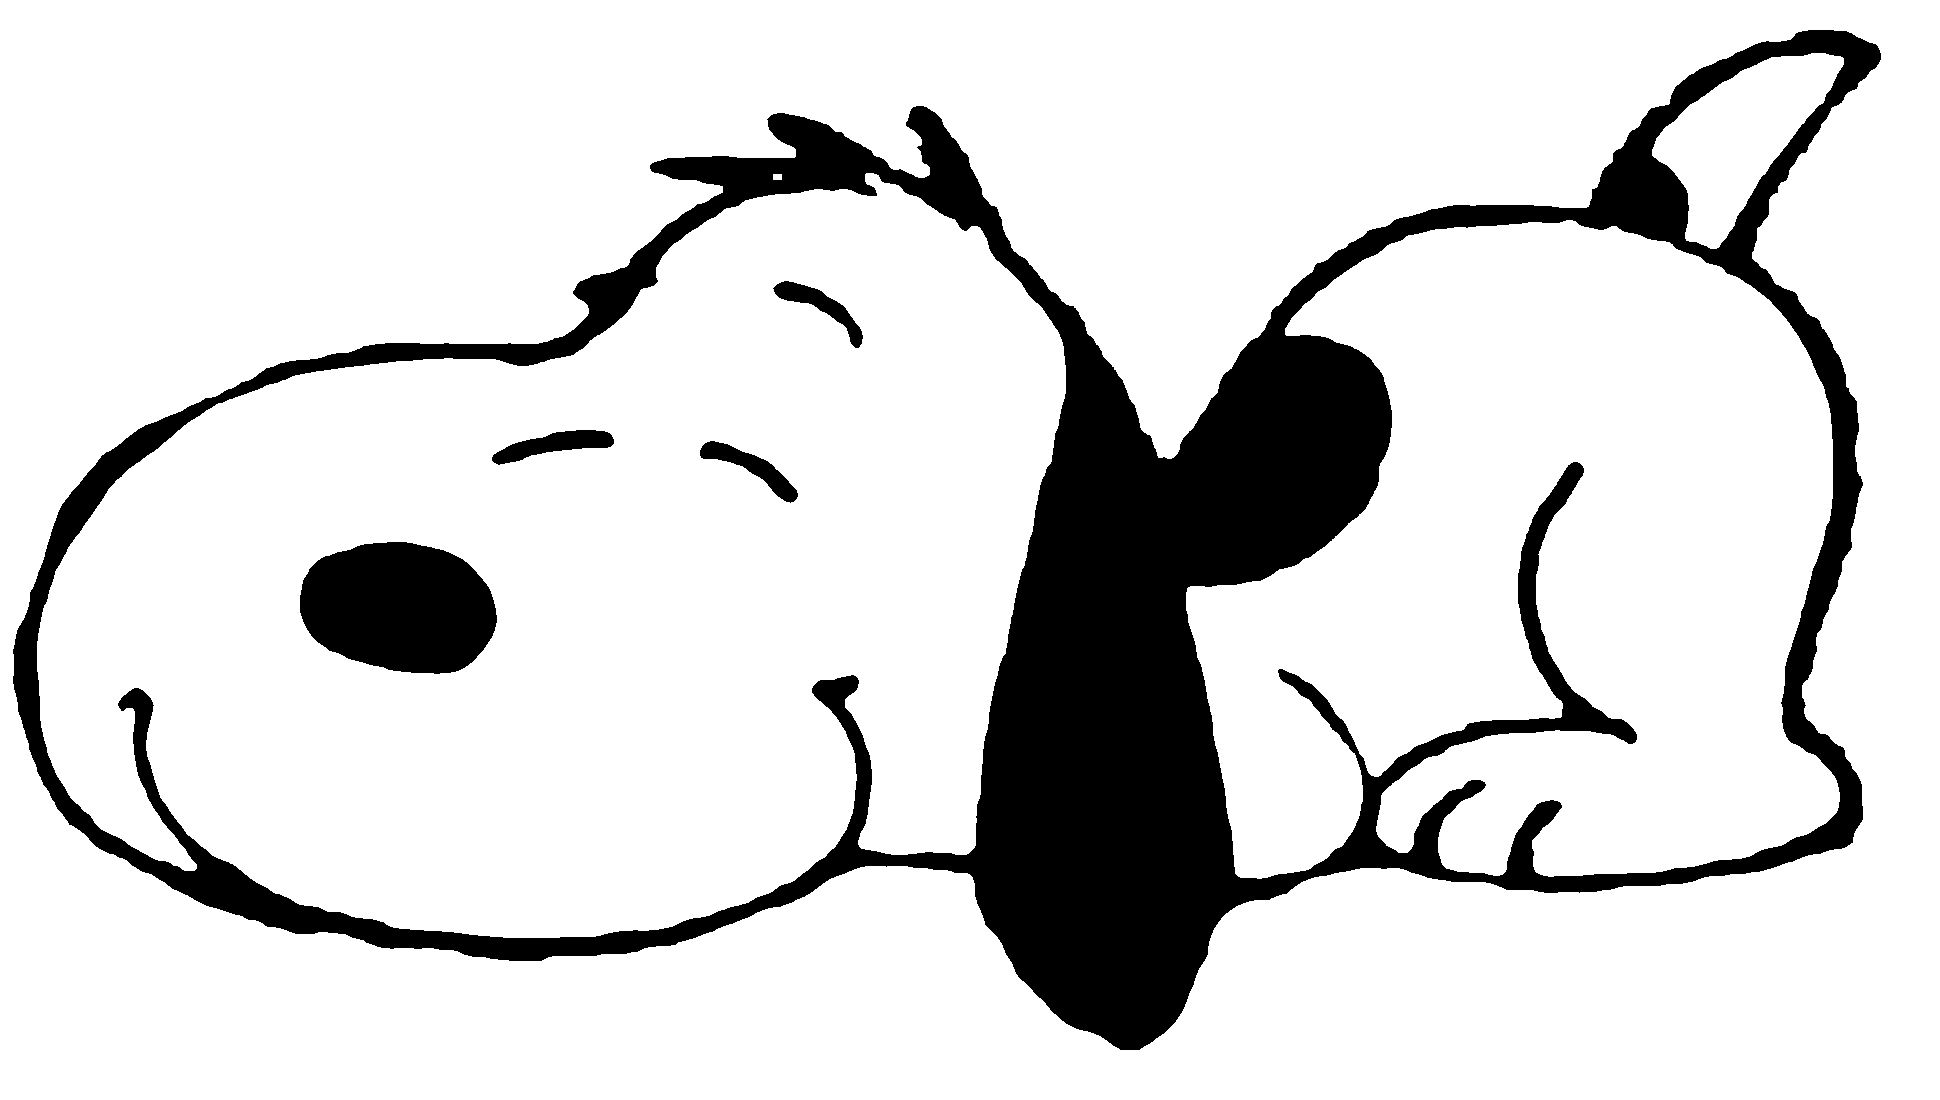 Snoopy Cute Pose by BradSnoopy97 on DeviantArt